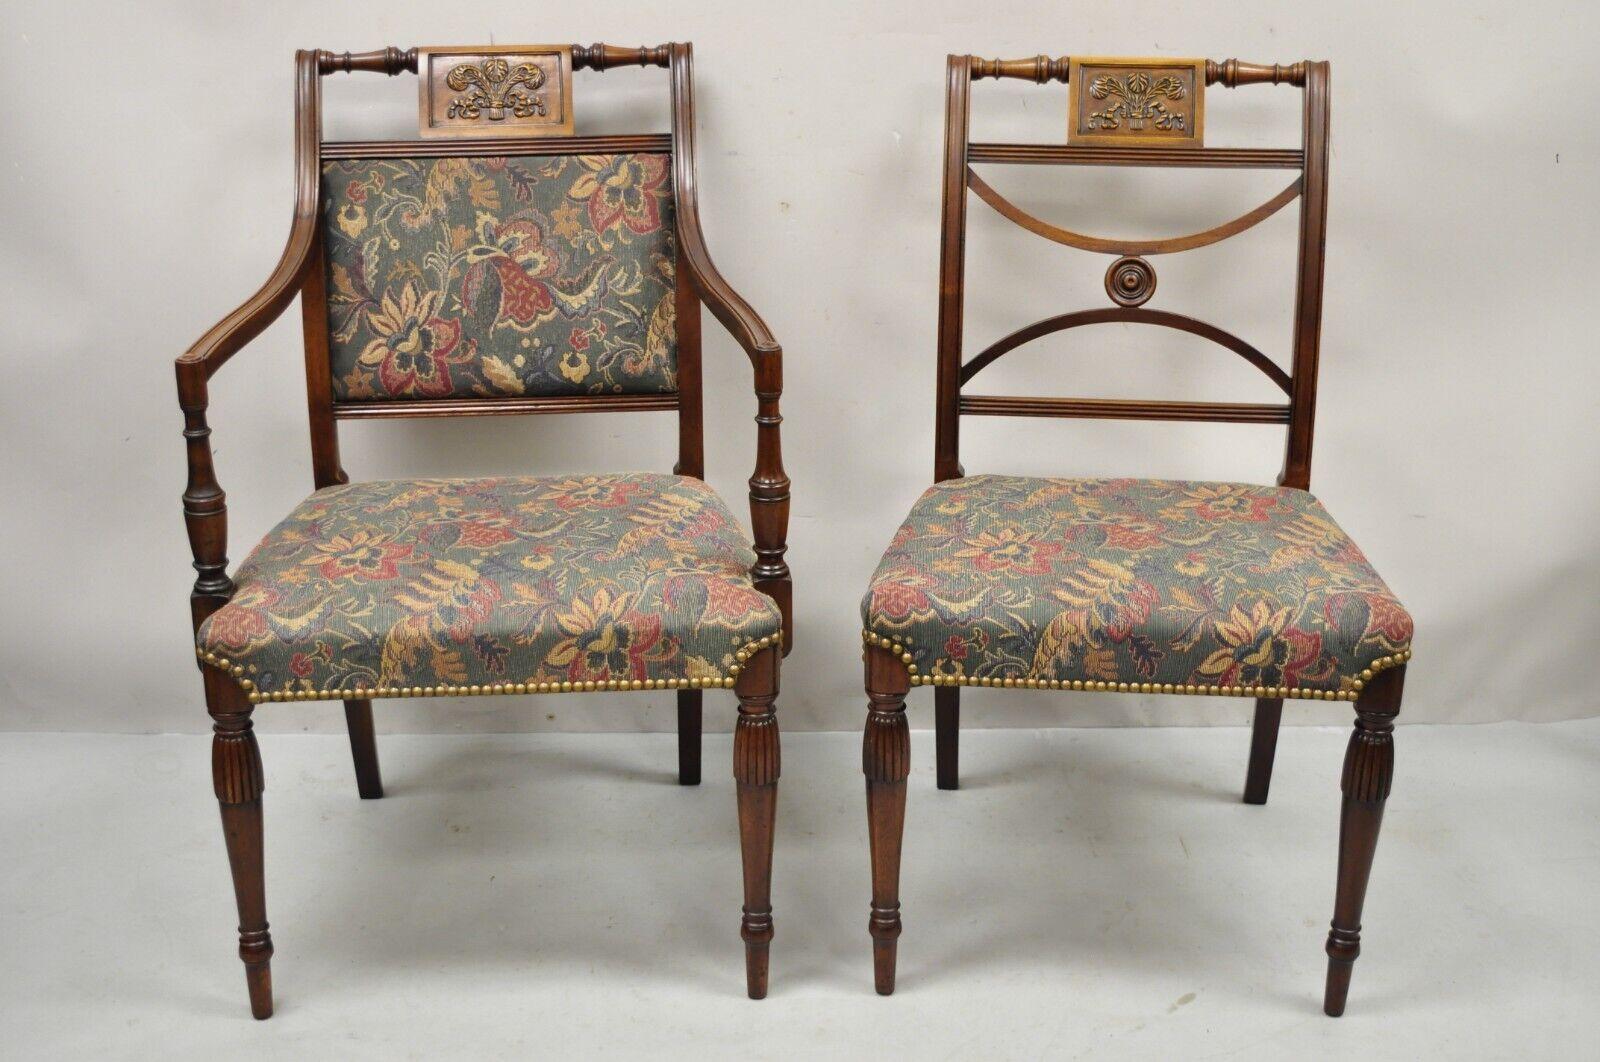 Vintage Mahogany English Sheraton Style Dining Chairs Prince of Wales - Set of 6. (1) Armchair, (5) Side chairs, Prince of wales plume carvings, solid wood frames, beautiful wood grain, nicely carved details, tapered legs, great style and form.